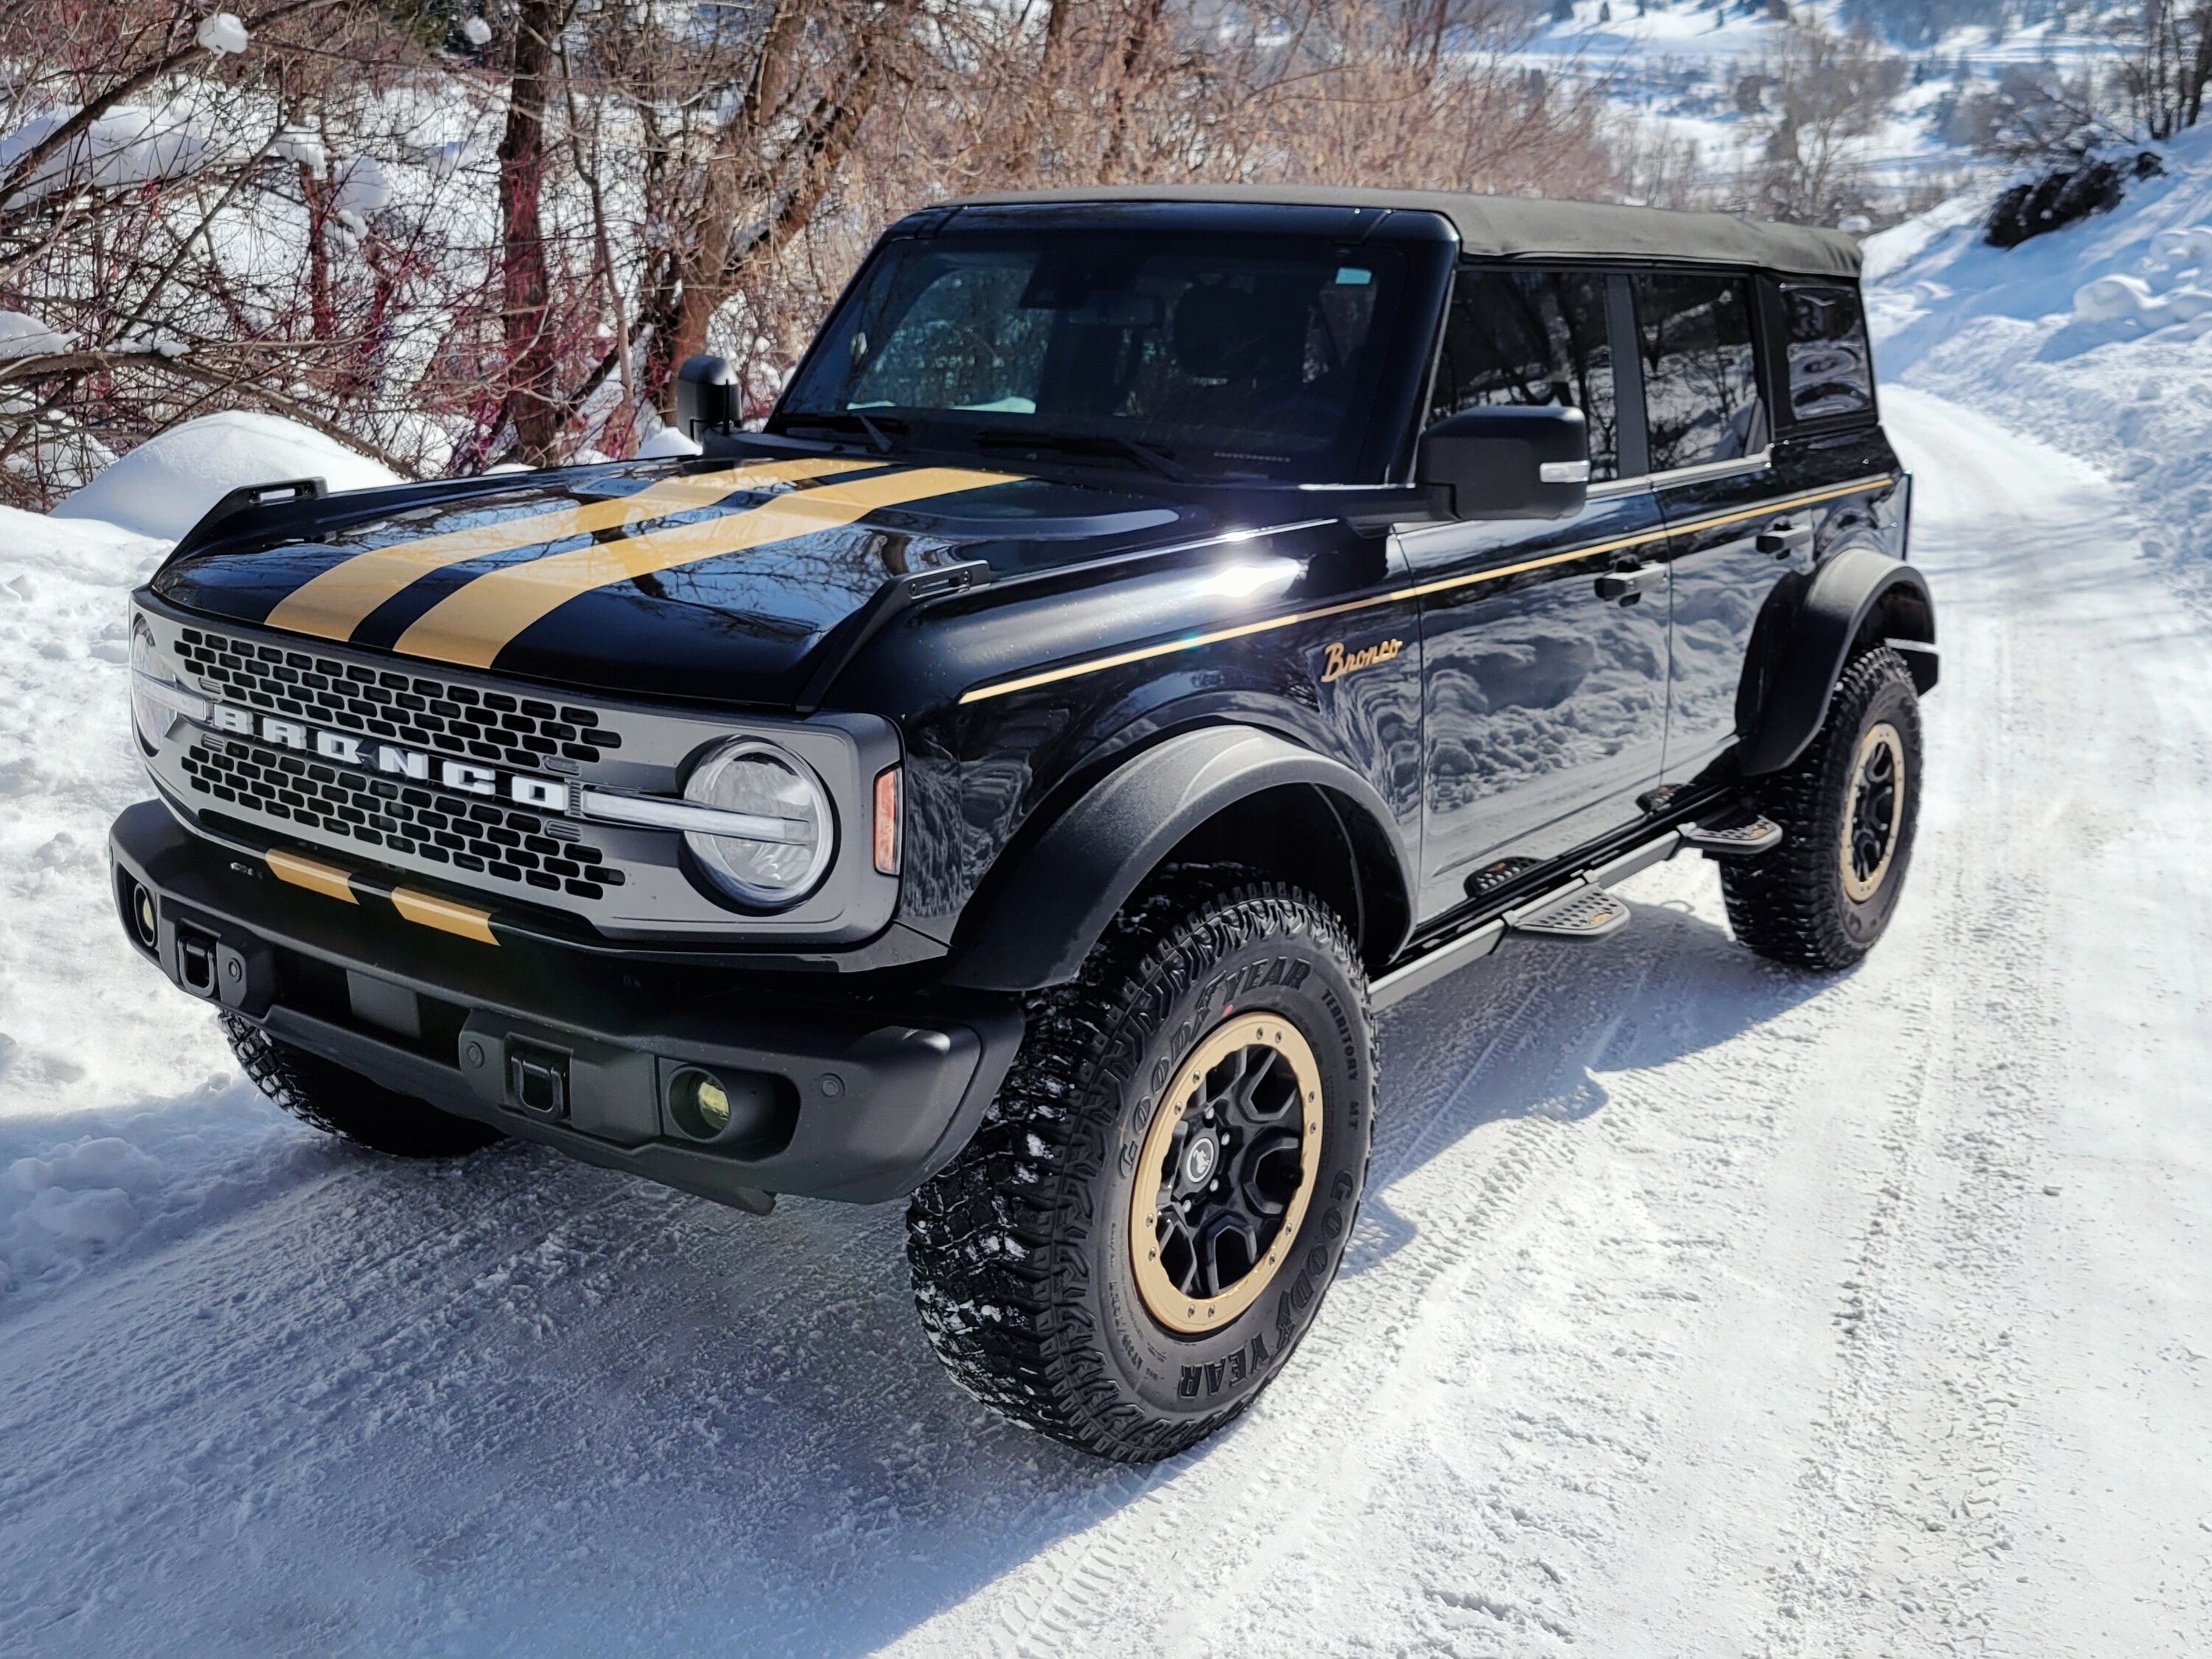 Ford Bronco Happy Wednesday!!! Let's see those 🥶 Ice / Sn❄w photos!!! 1000004825